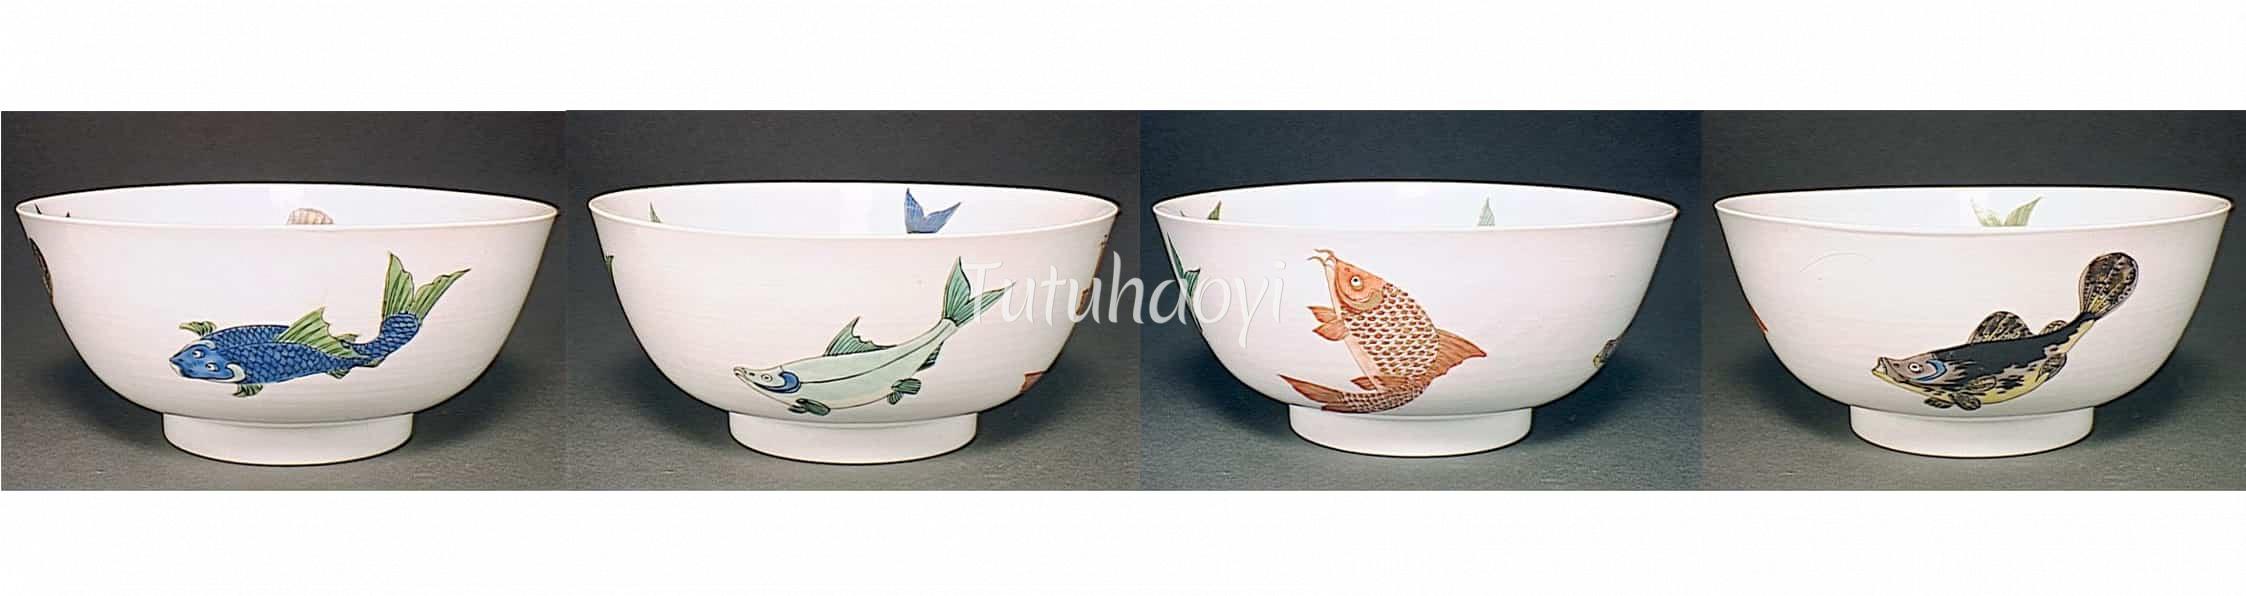 porcelain bowl painted different fishes Kangxi period Guimet Museum